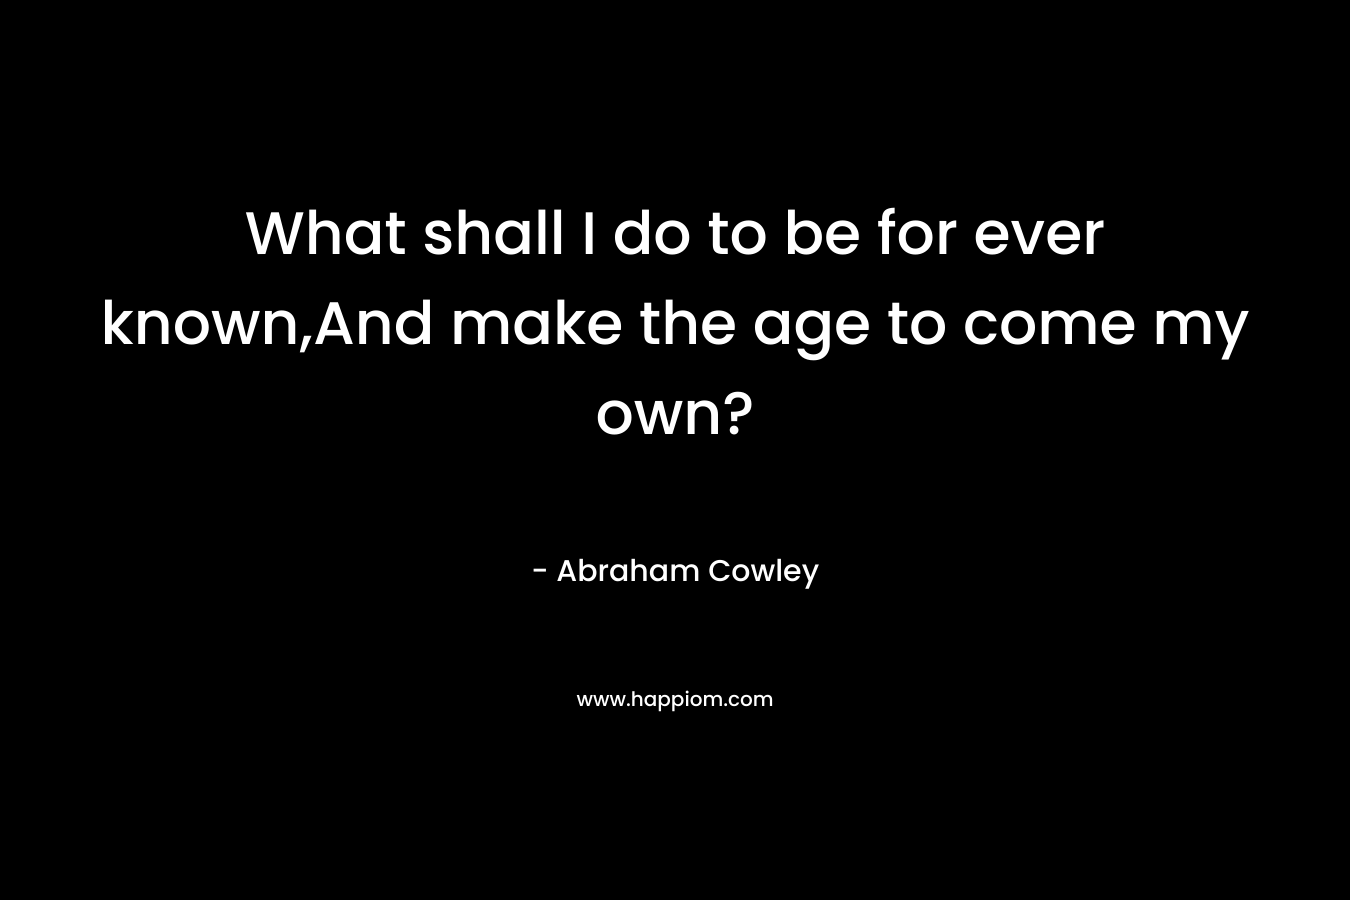 What shall I do to be for ever known,And make the age to come my own? – Abraham Cowley